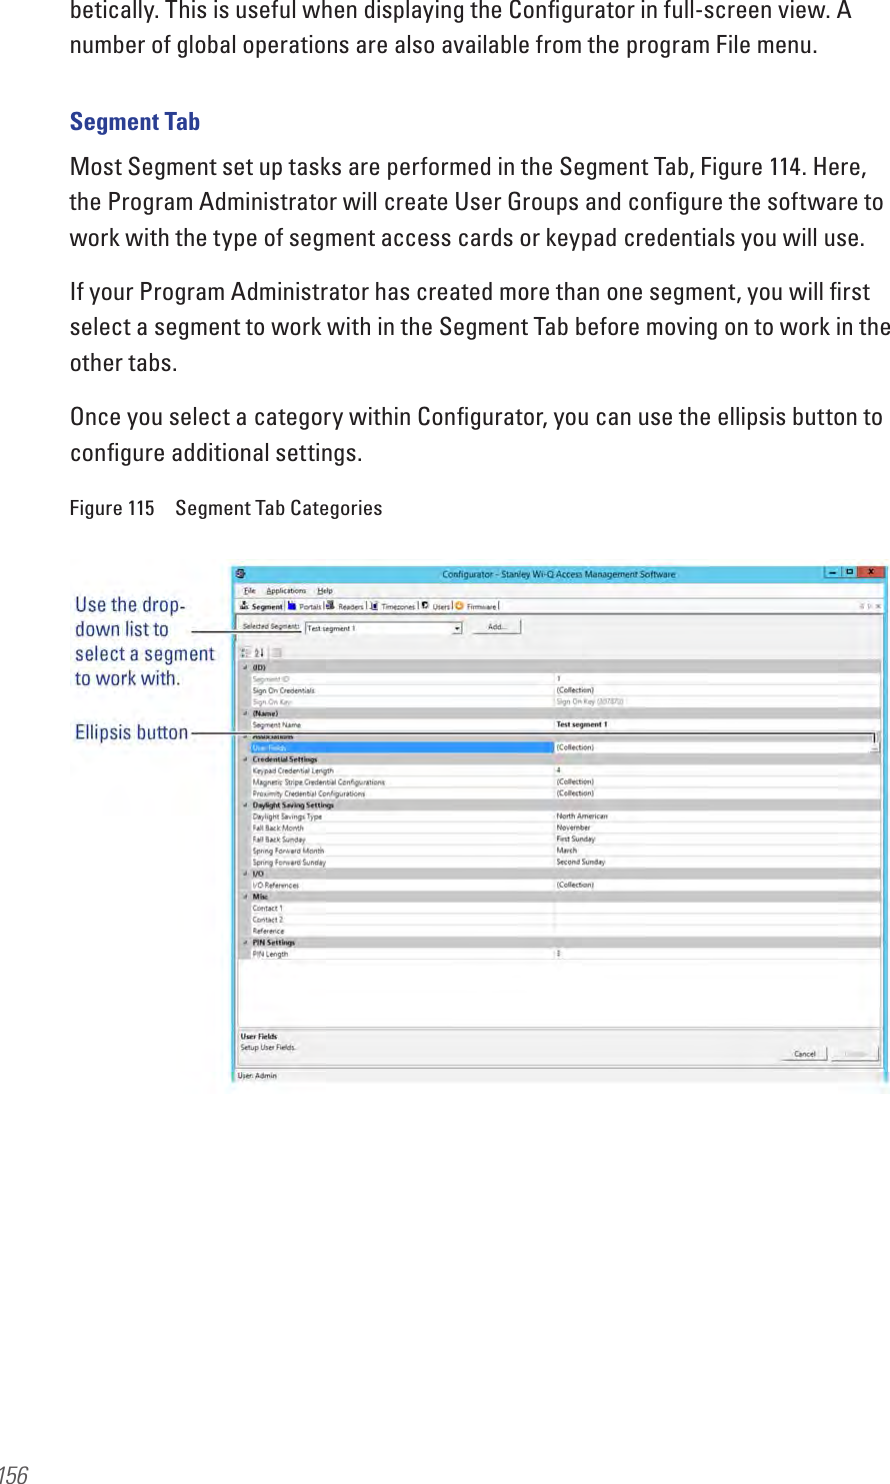 156betically. This is useful when displaying the Conﬁgurator in full-screen view. A number of global operations are also available from the program File menu.Segment TabMost Segment set up tasks are performed in the Segment Tab, Figure 114. Here, the Program Administrator will create User Groups and conﬁgure the software to work with the type of segment access cards or keypad credentials you will use. If your Program Administrator has created more than one segment, you will ﬁrst select a segment to work with in the Segment Tab before moving on to work in the other tabs. Once you select a category within Conﬁgurator, you can use the ellipsis button to conﬁgure additional settings.Figure 115  Segment Tab Categories